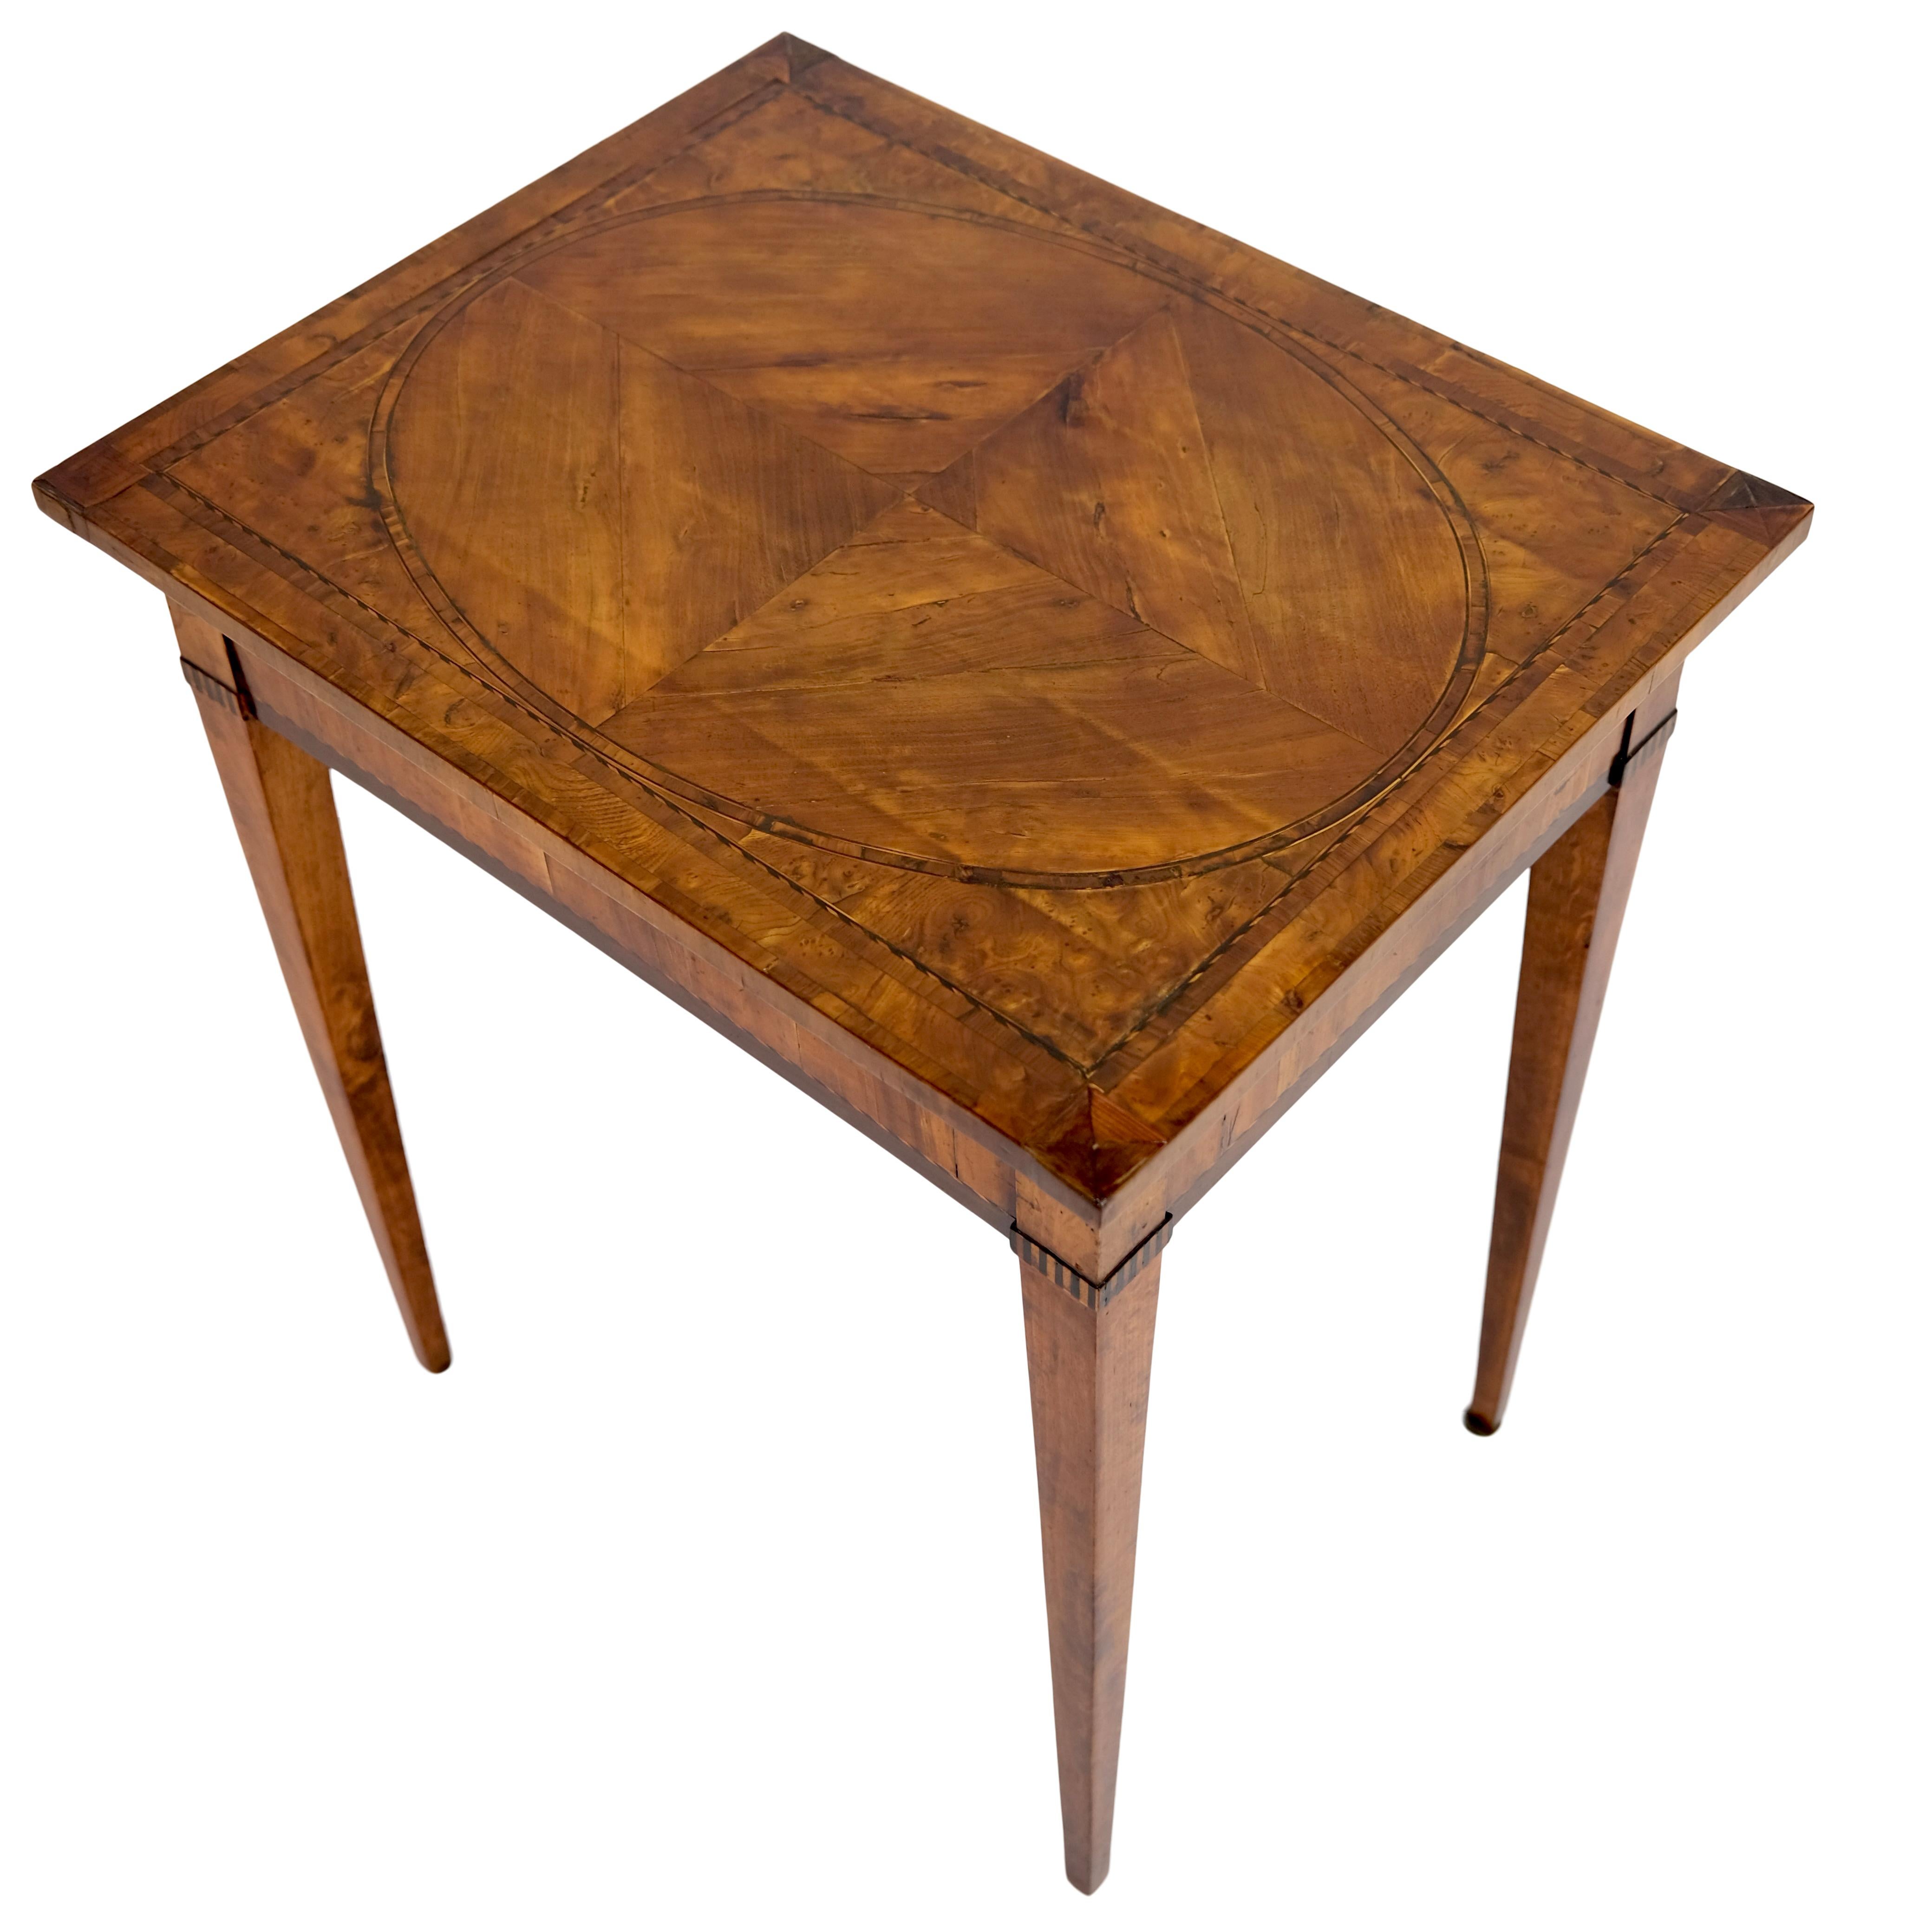 Polished Handpolished 1780s Louis Seize XVI Side Table in Cherry Wood For Sale